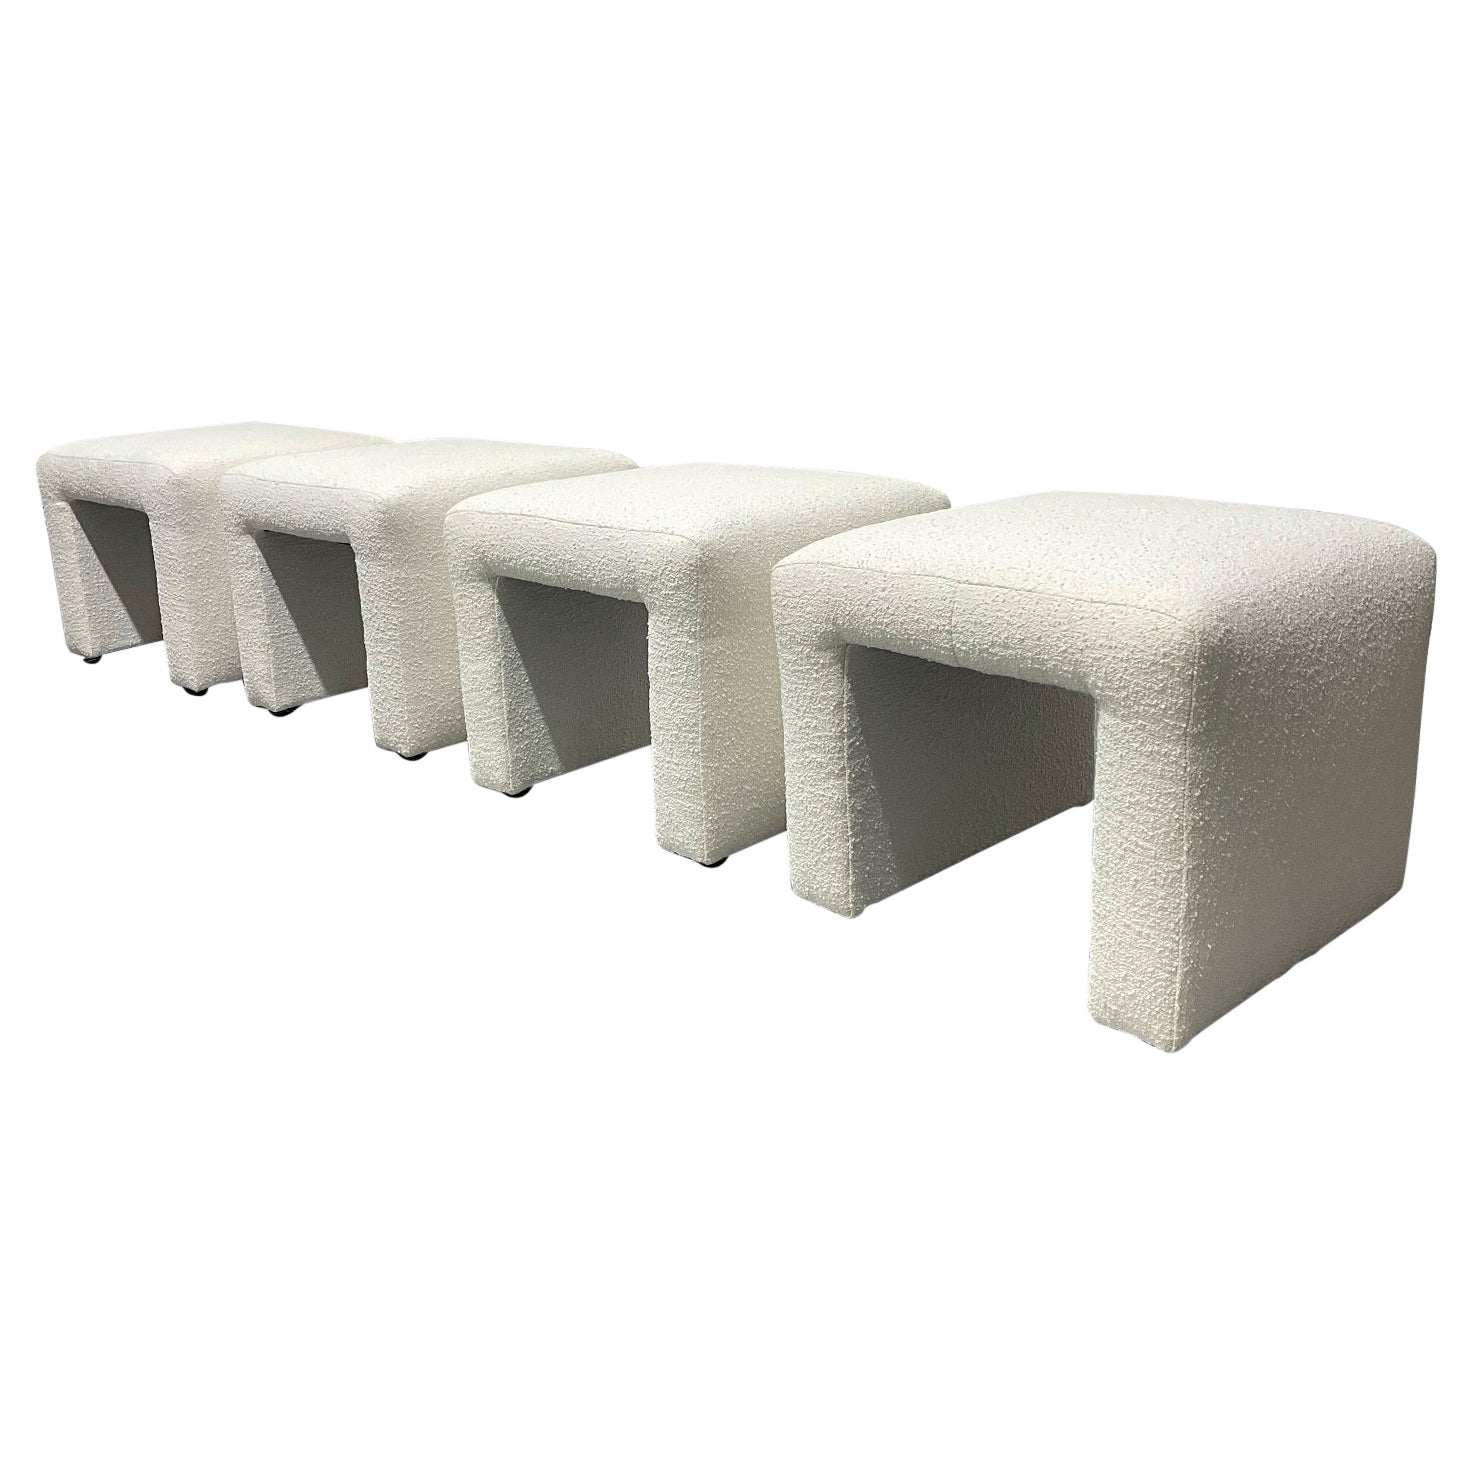 Set of 4 Mid-Century Modern Benches in Boucle